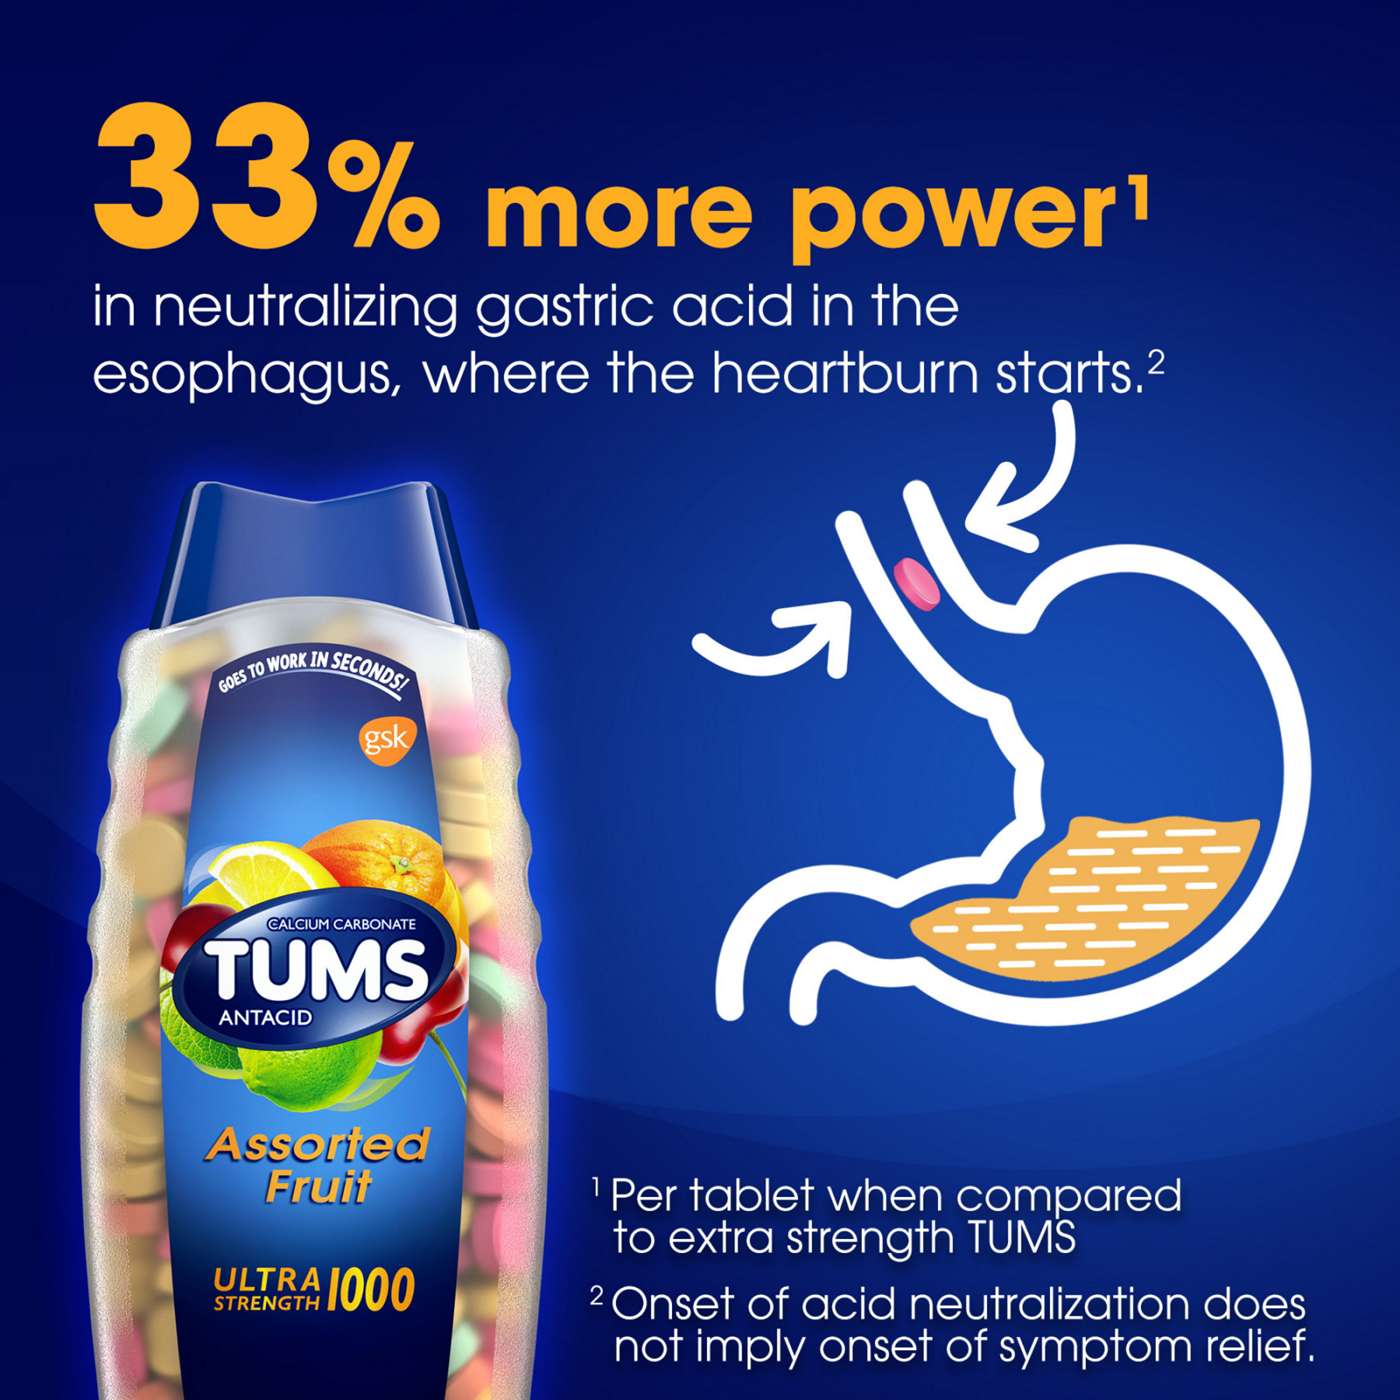 Tums Ultra Strength Antacid Tablets; image 4 of 8